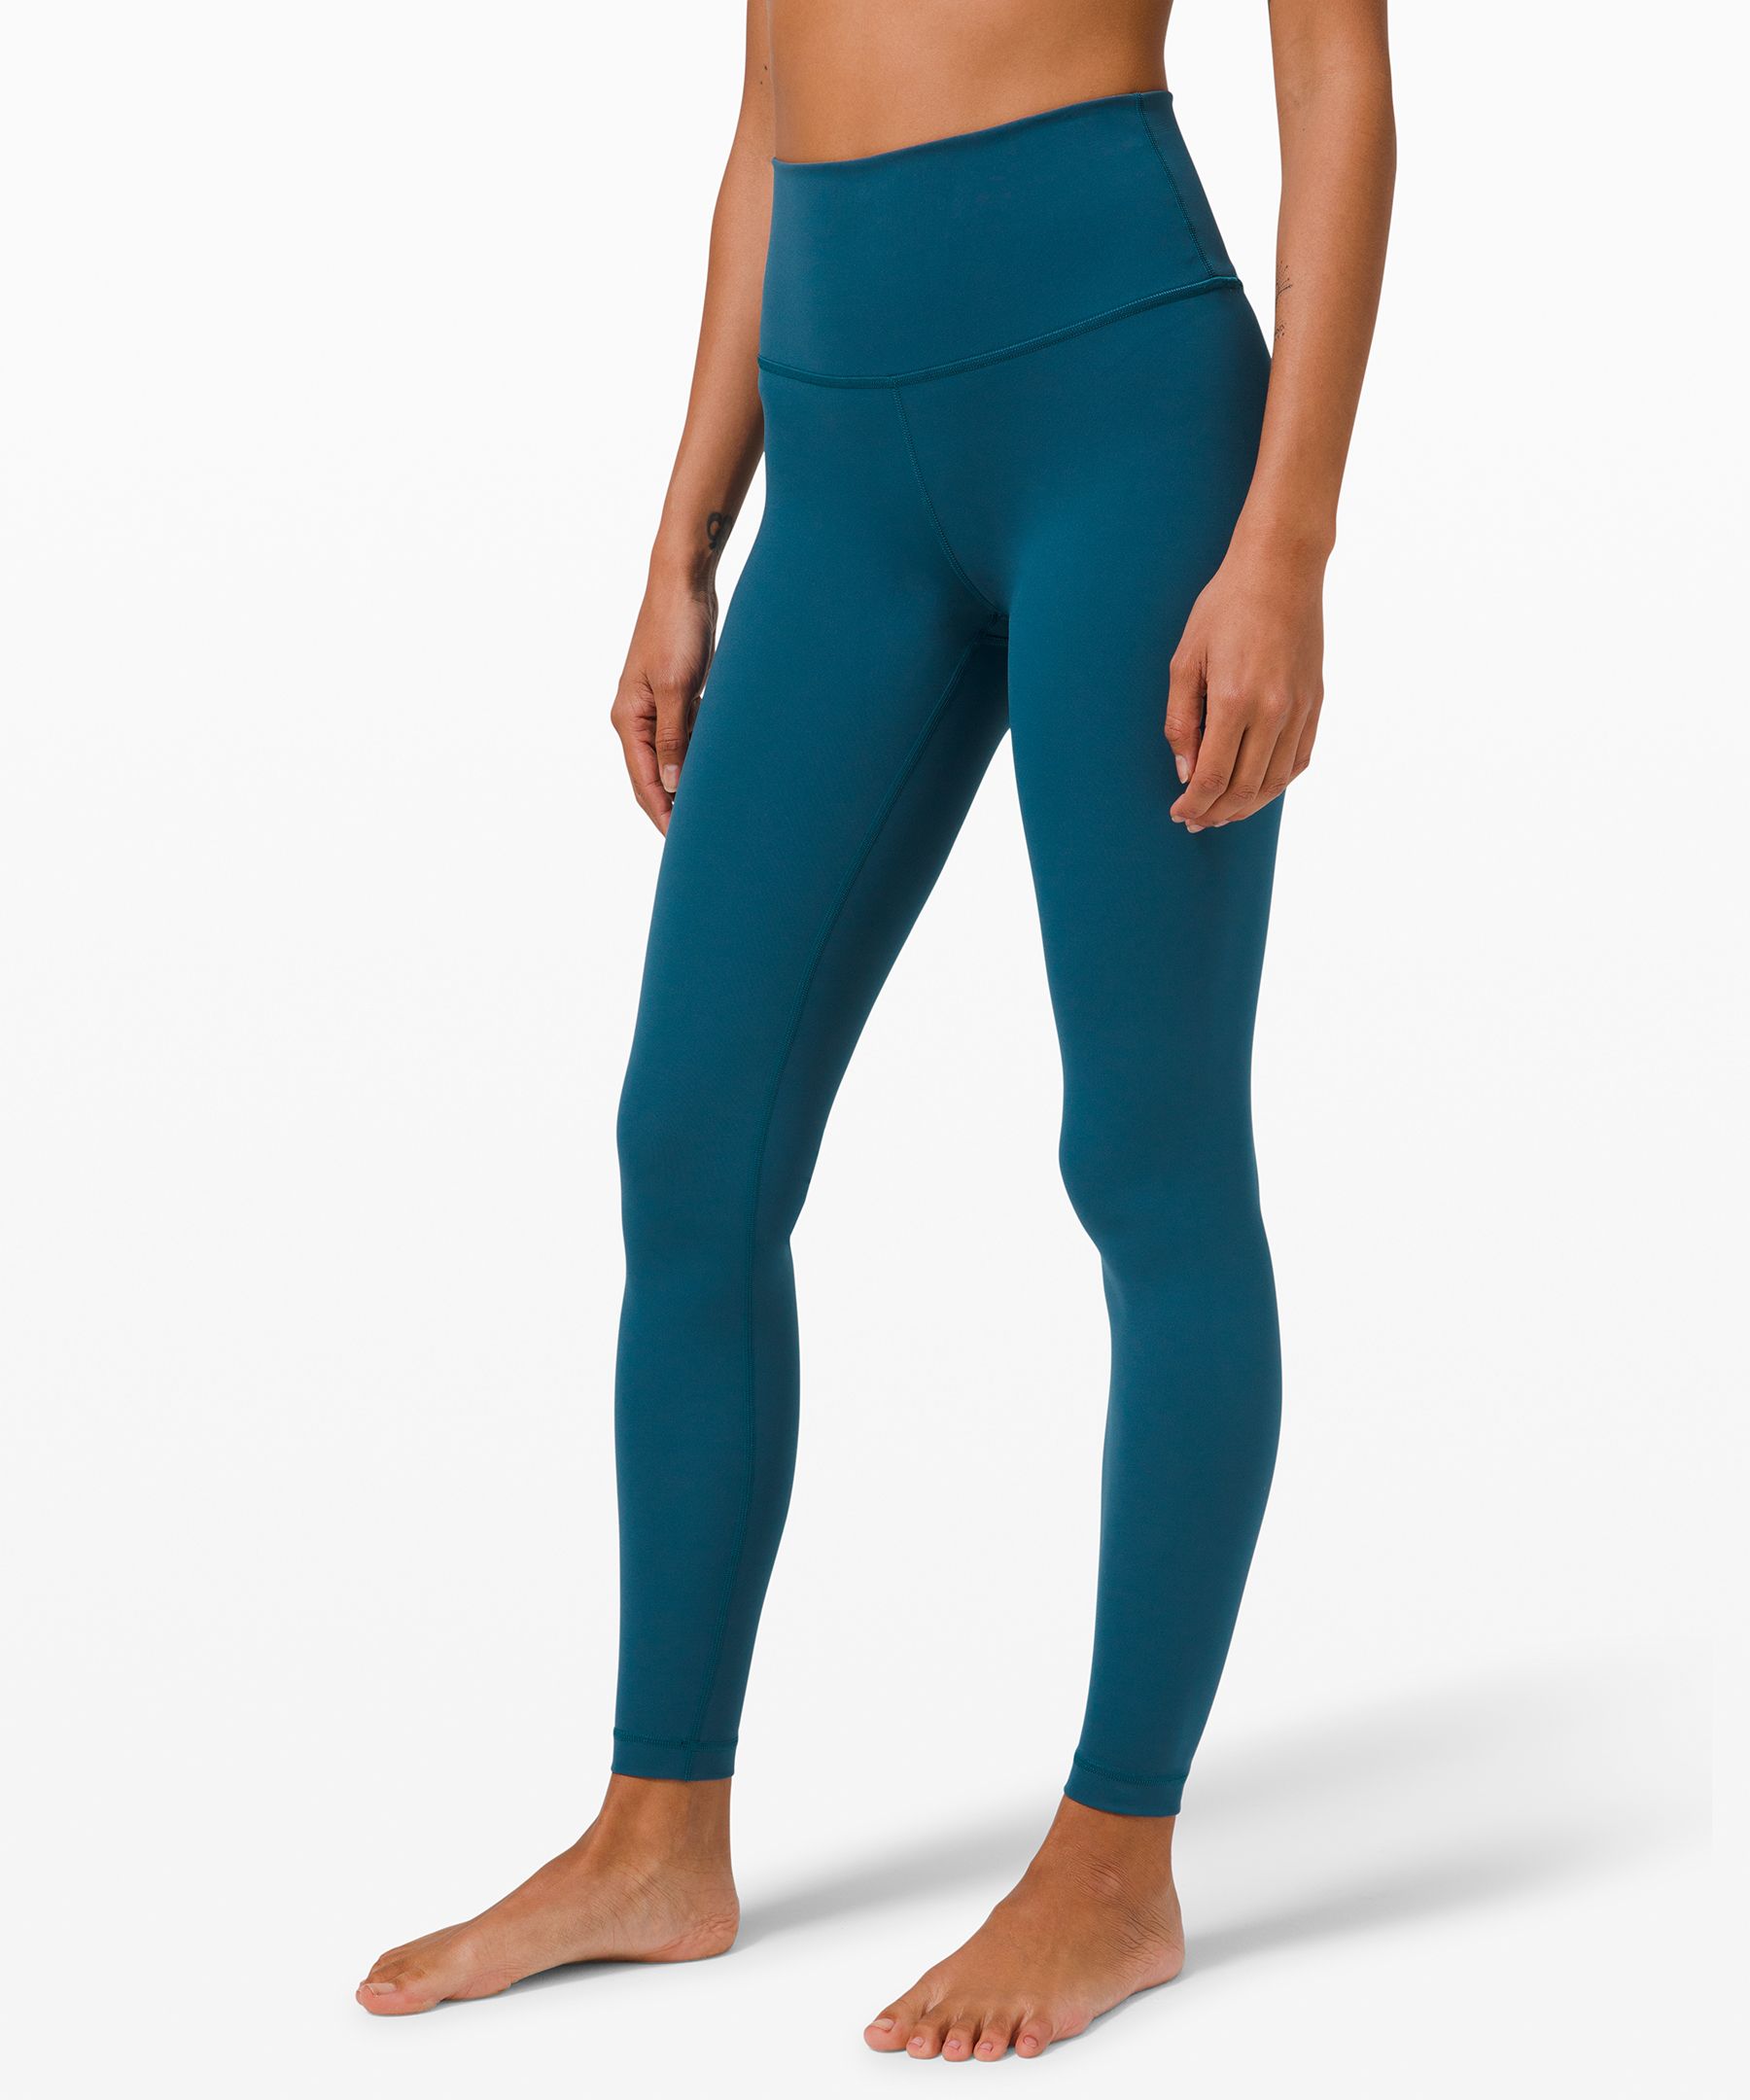 Wunder Under Hi-Rise 7/8 Tight (Full-On Luxtreme) in Thrive